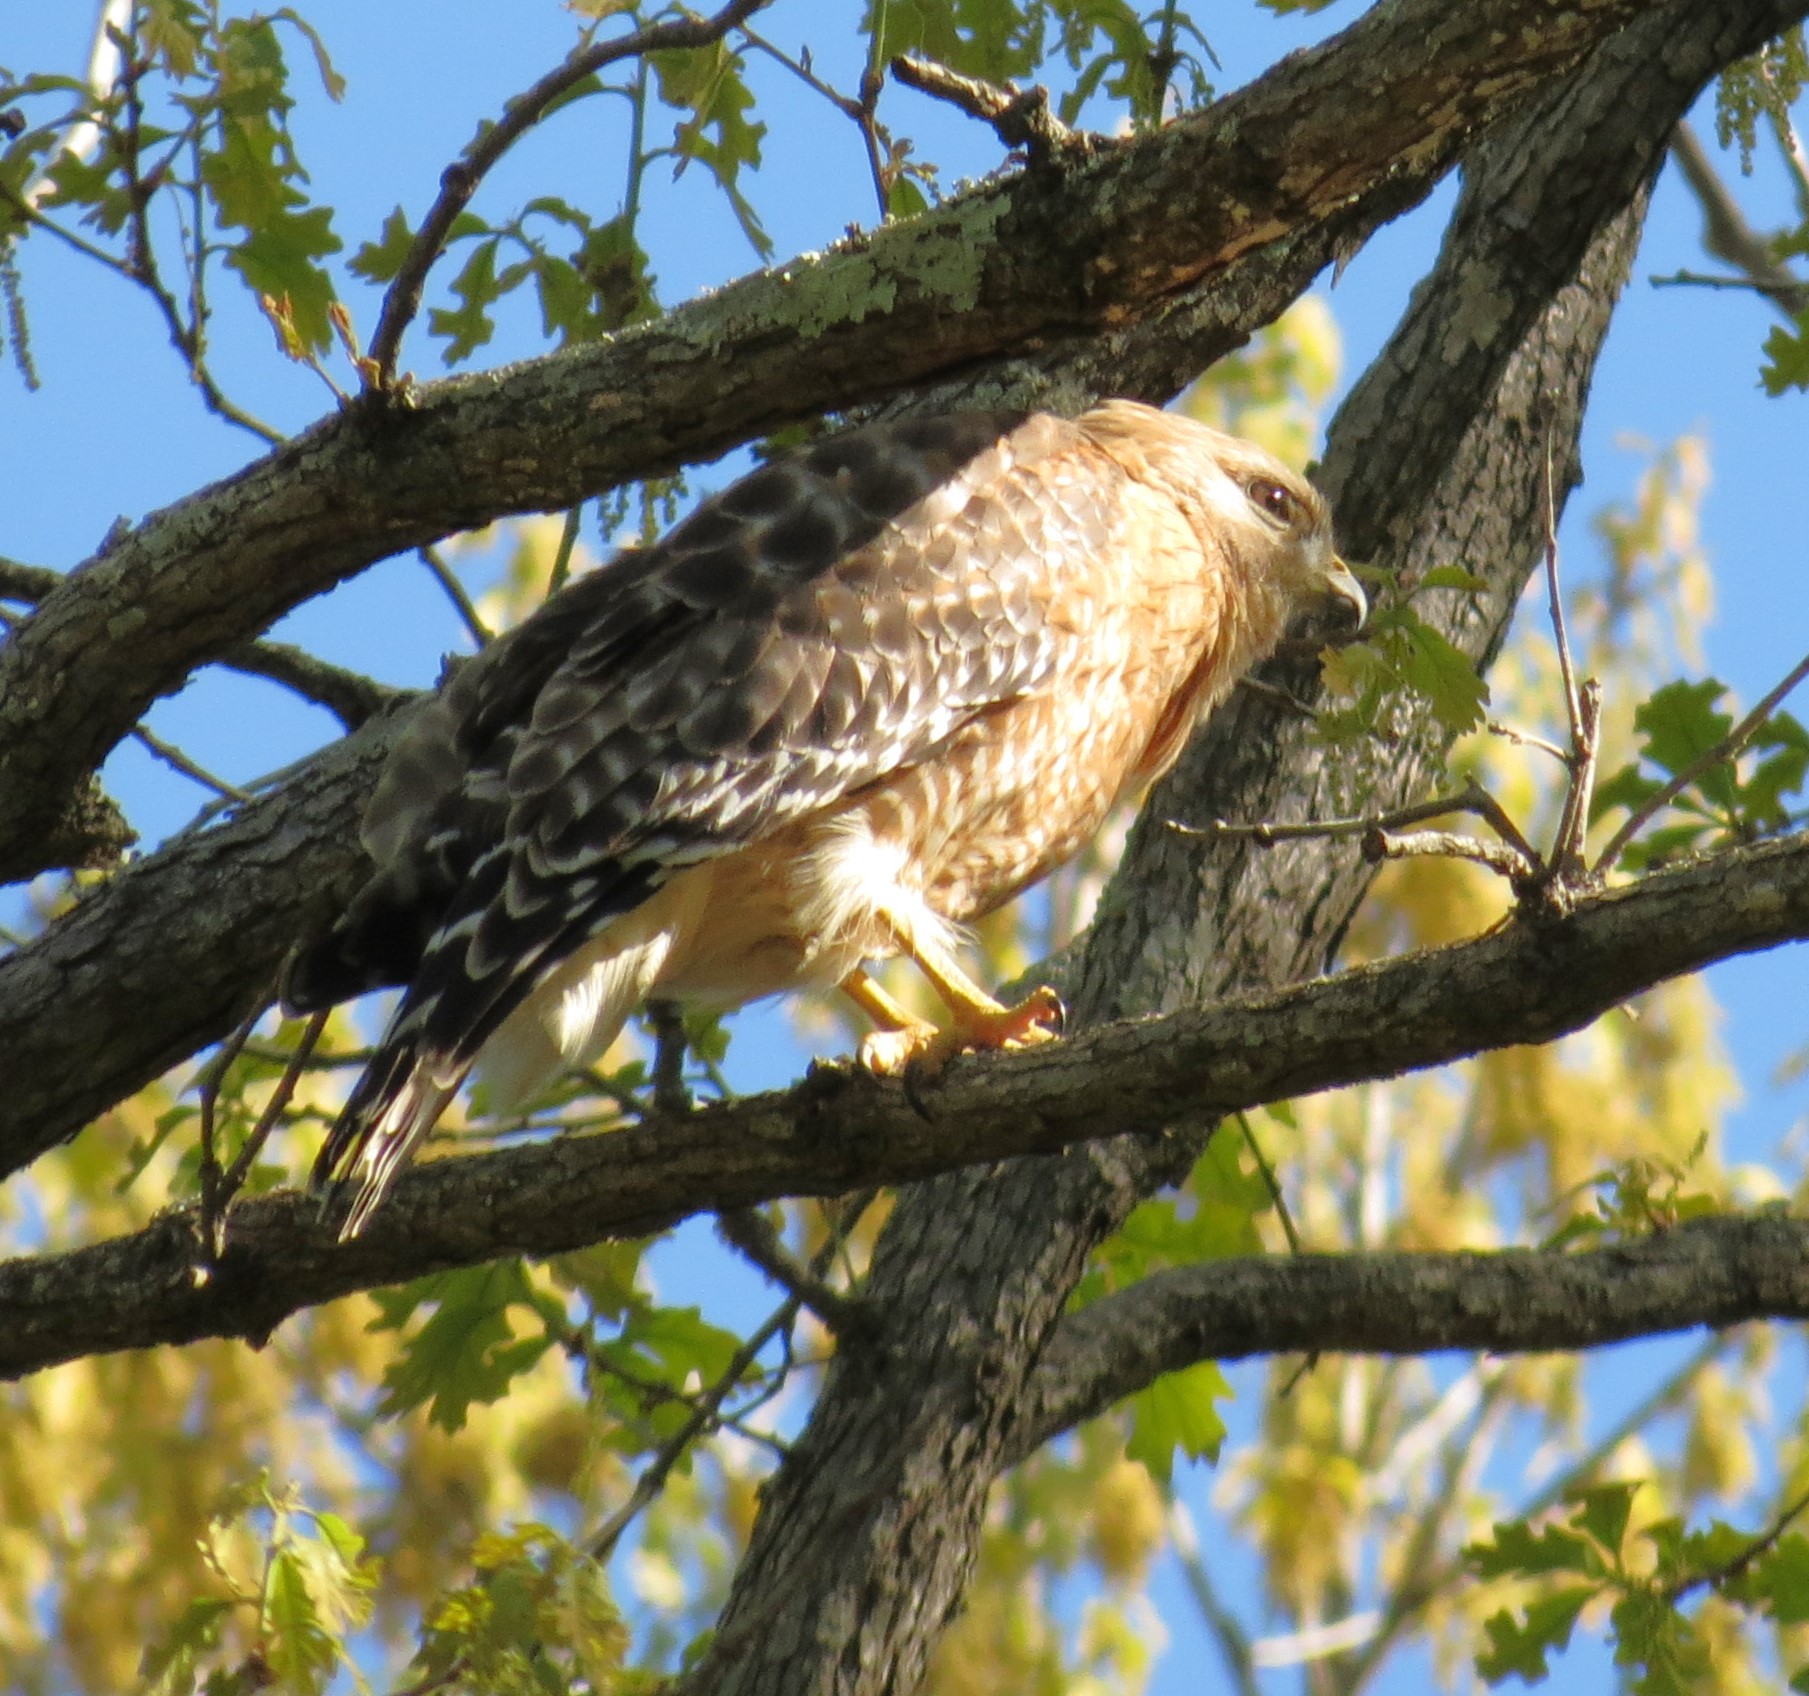 The hawk is perched on a branch, partly in sun, partly in shade. He appears to be hunched down.